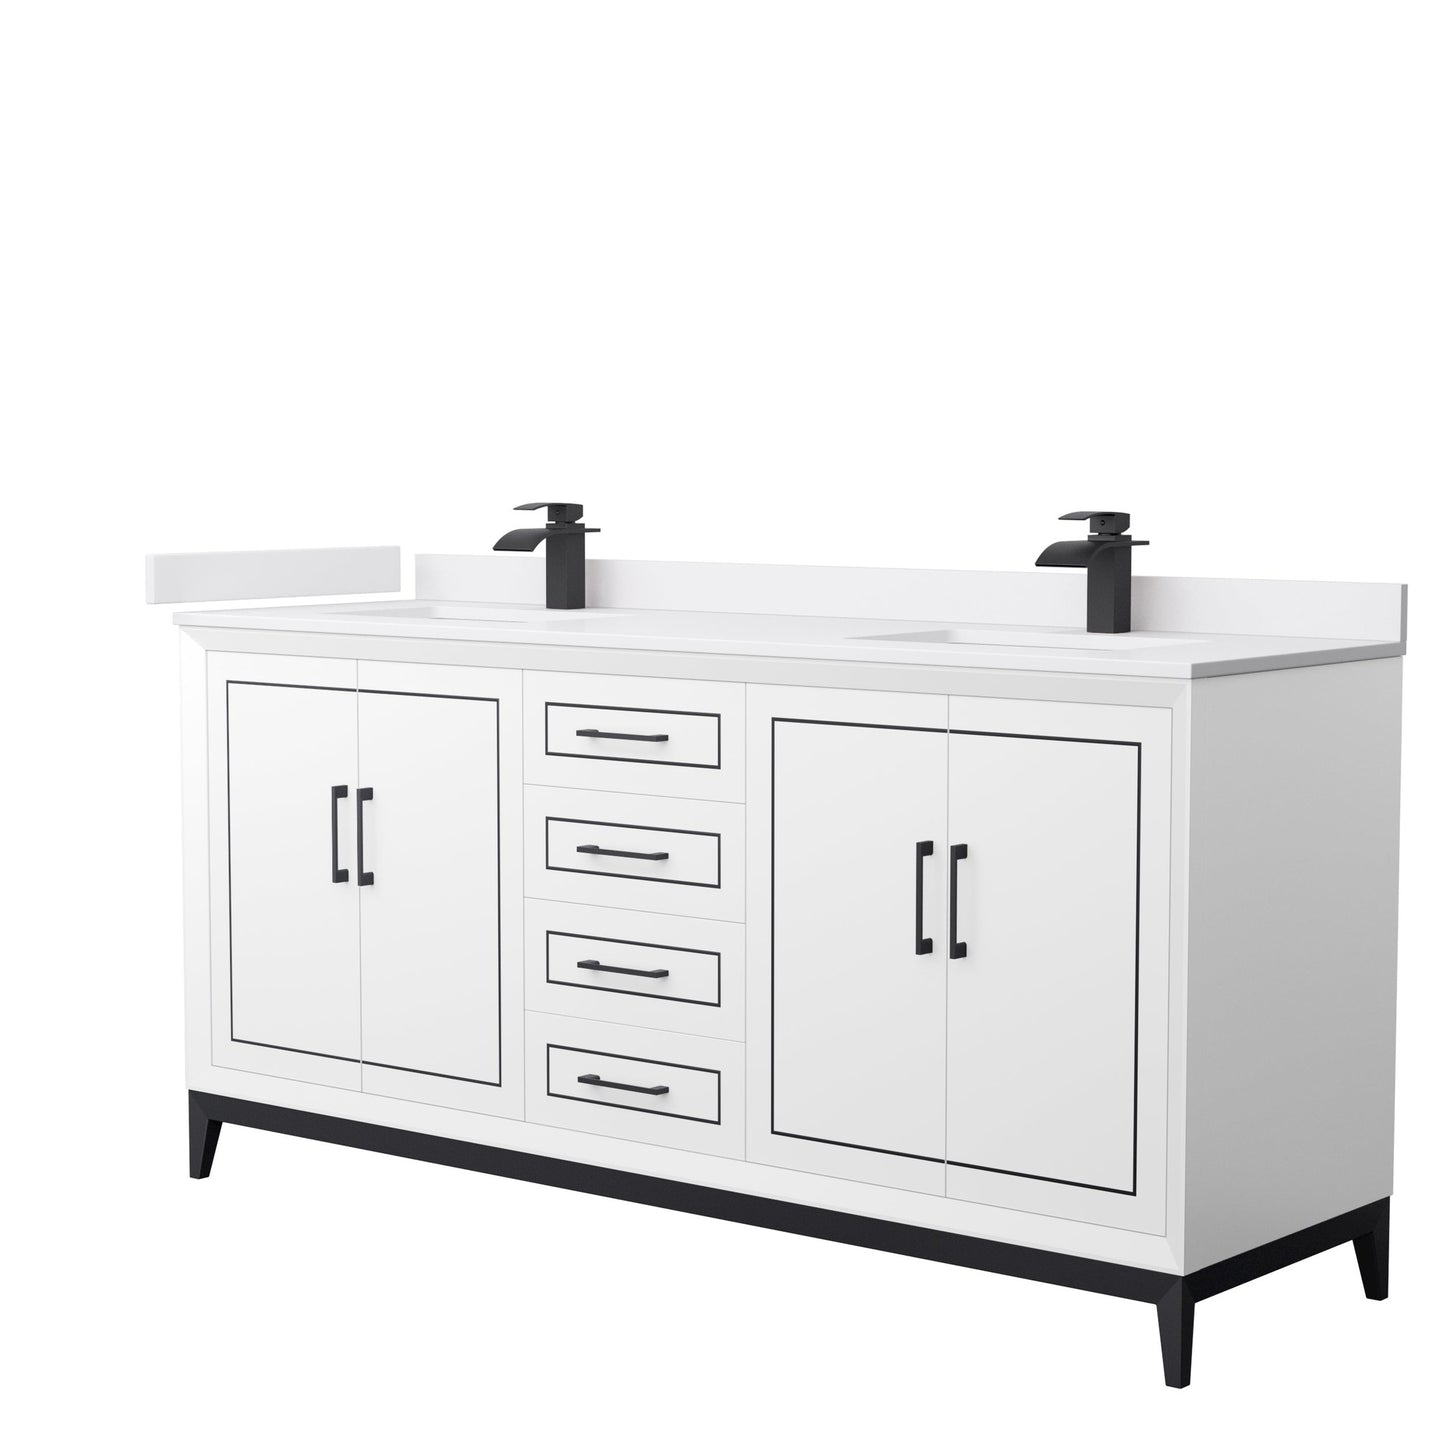 Wyndham Collection Marlena 72" Double Bathroom Vanity in White, White Cultured Marble Countertop, Undermount Square Sinks, Matte Black Trim